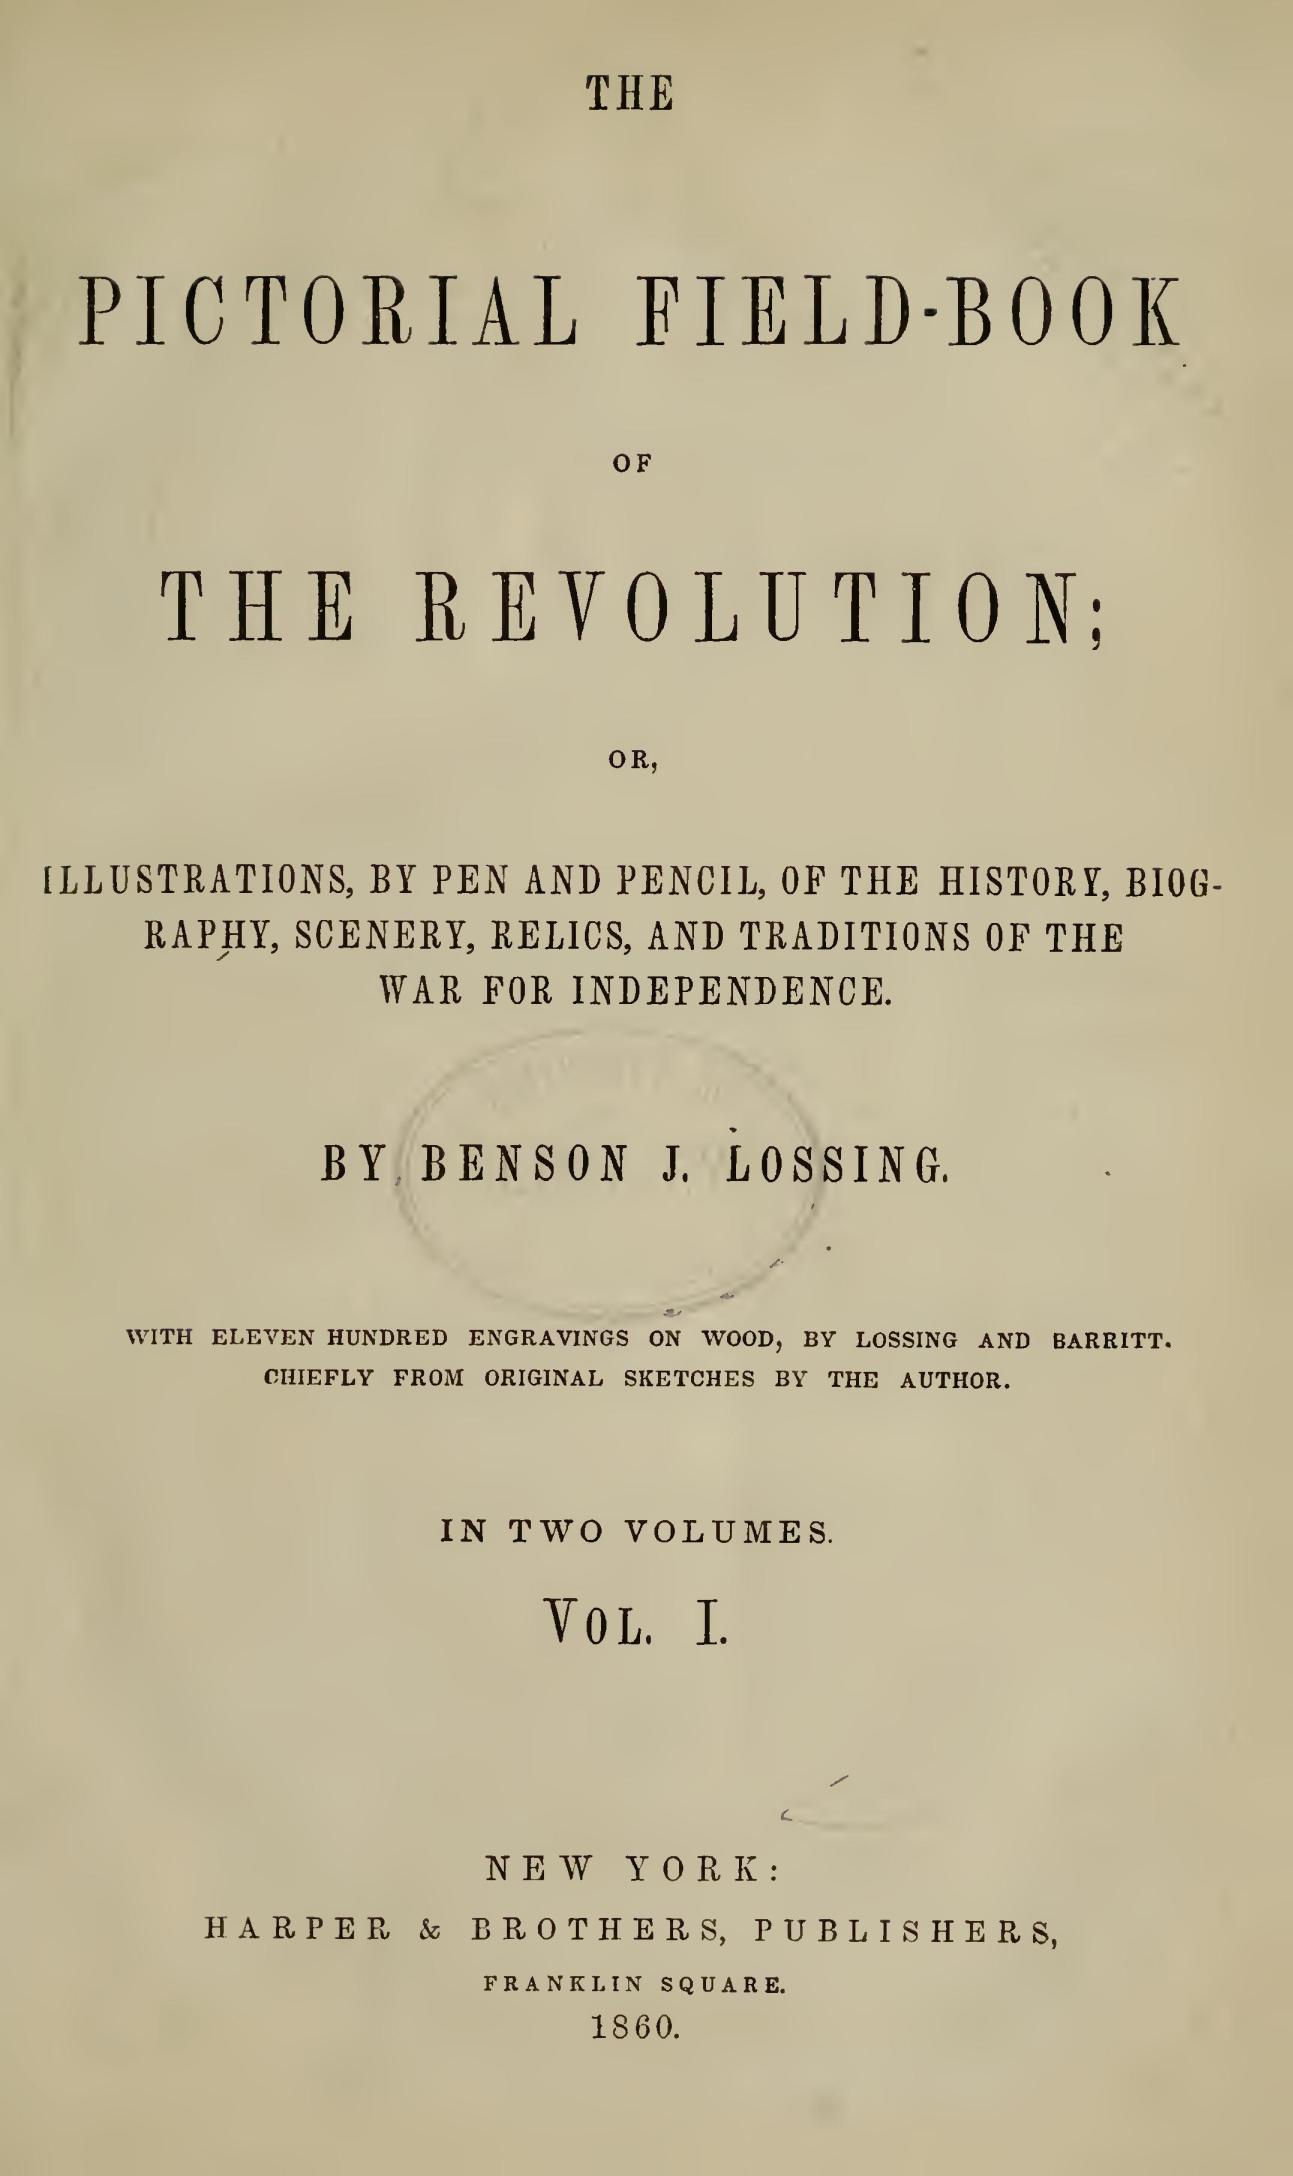 The Pictorial Field-book of the Revolution, by Benson J